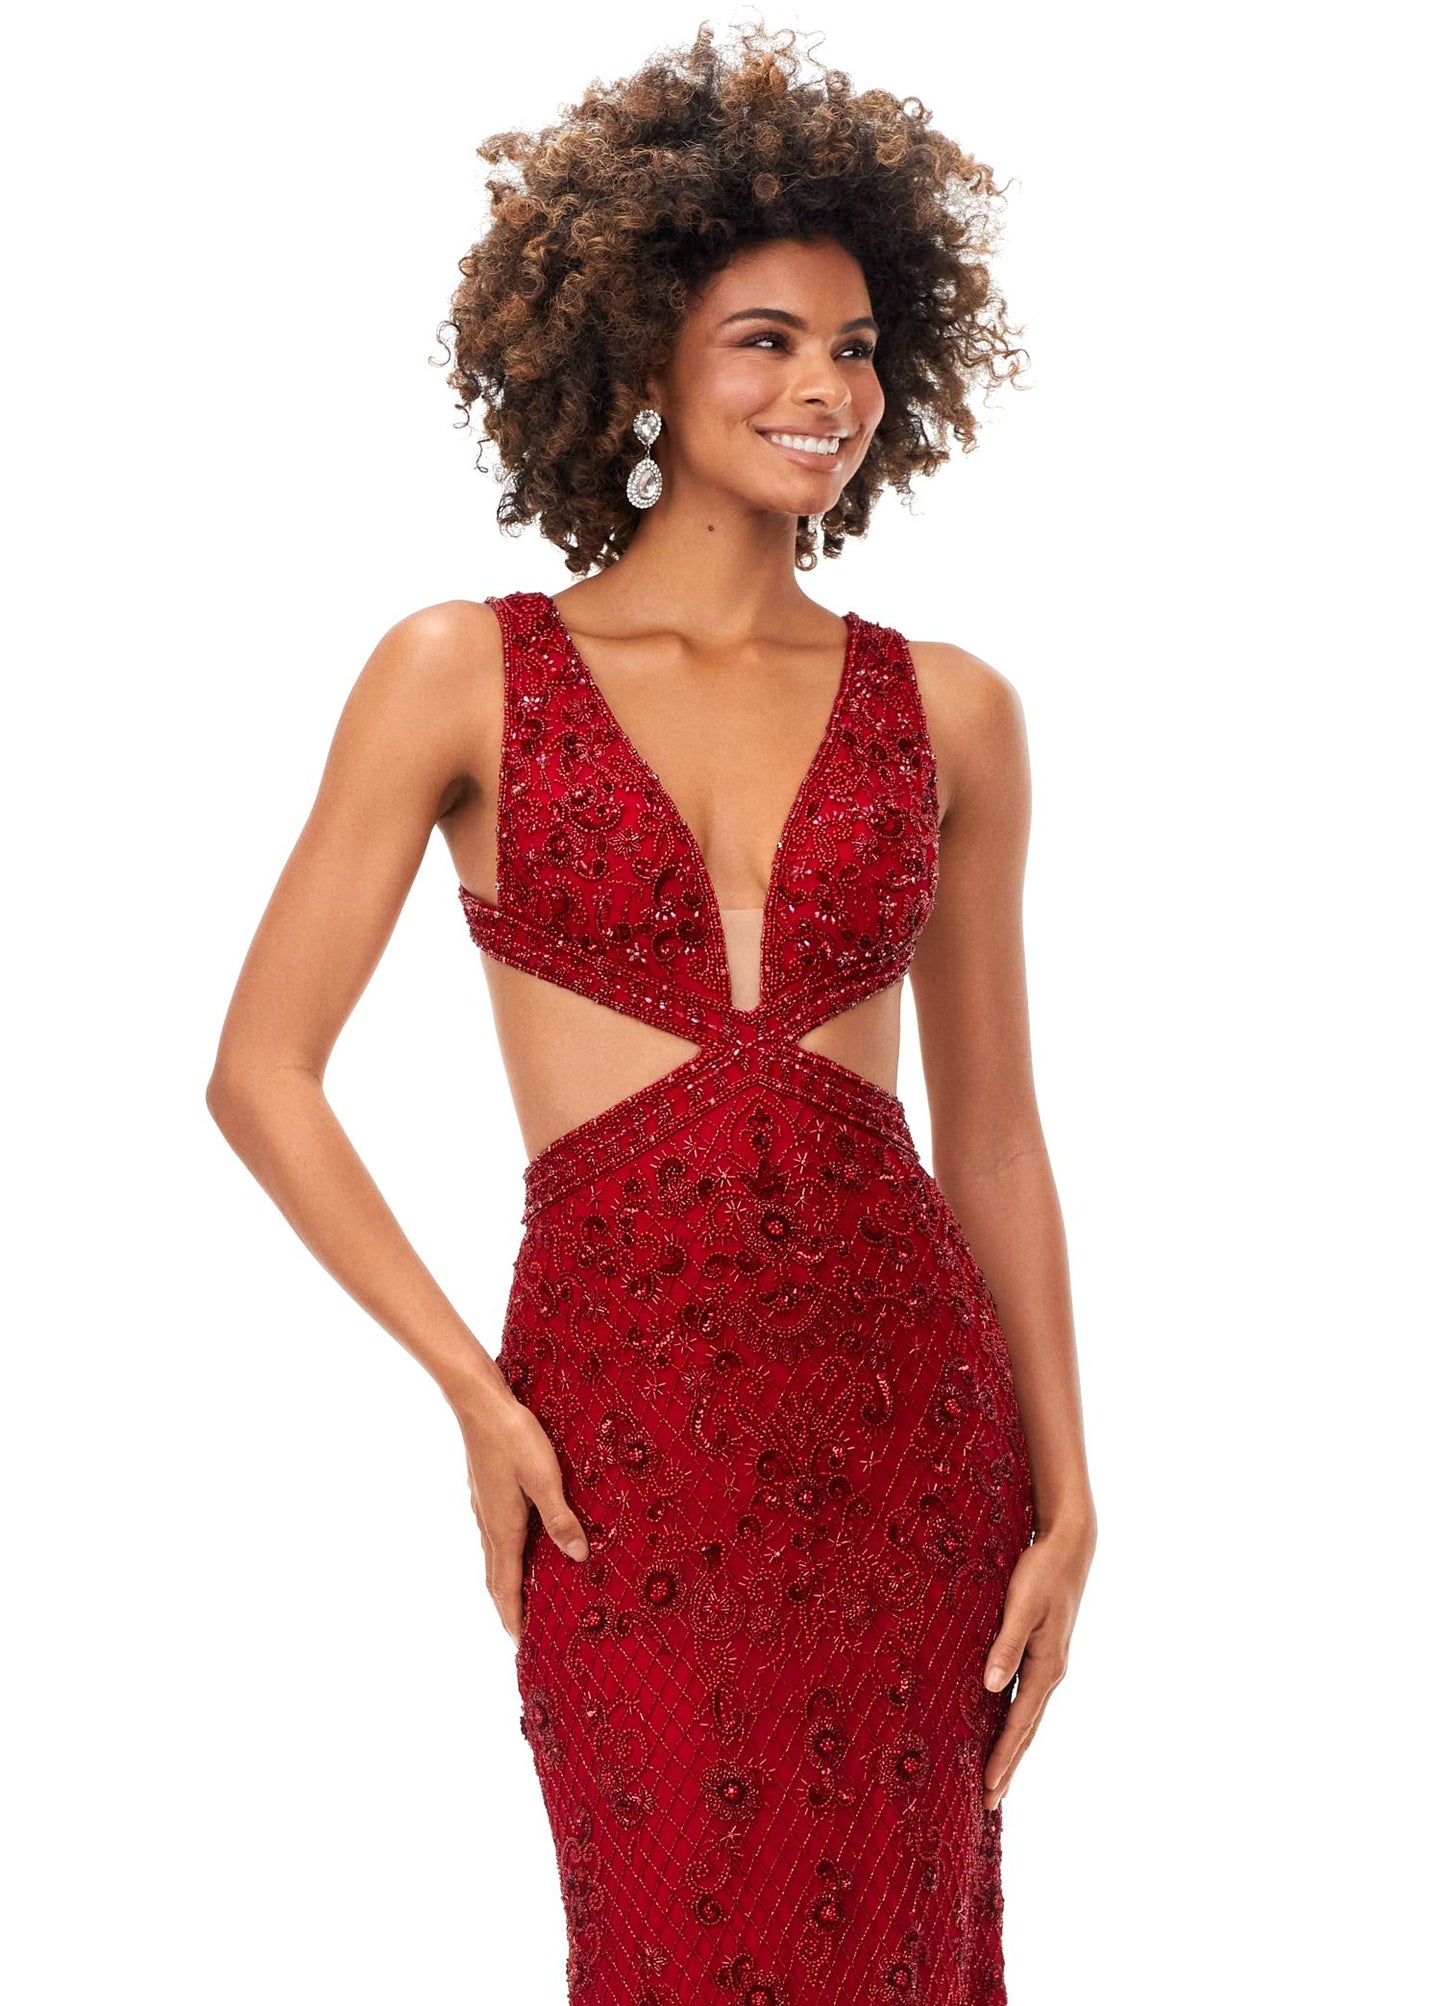 Ashley Lauren 11366 Turn heads in this v-neck gown with side cut outs and an intricate bead pattern. The gown is complete with a lace up open back and sweep train. V-Neckline Cut Outs Lace Up Back Sweep Train COLORS: Gold, Red, Lilac, Peacock